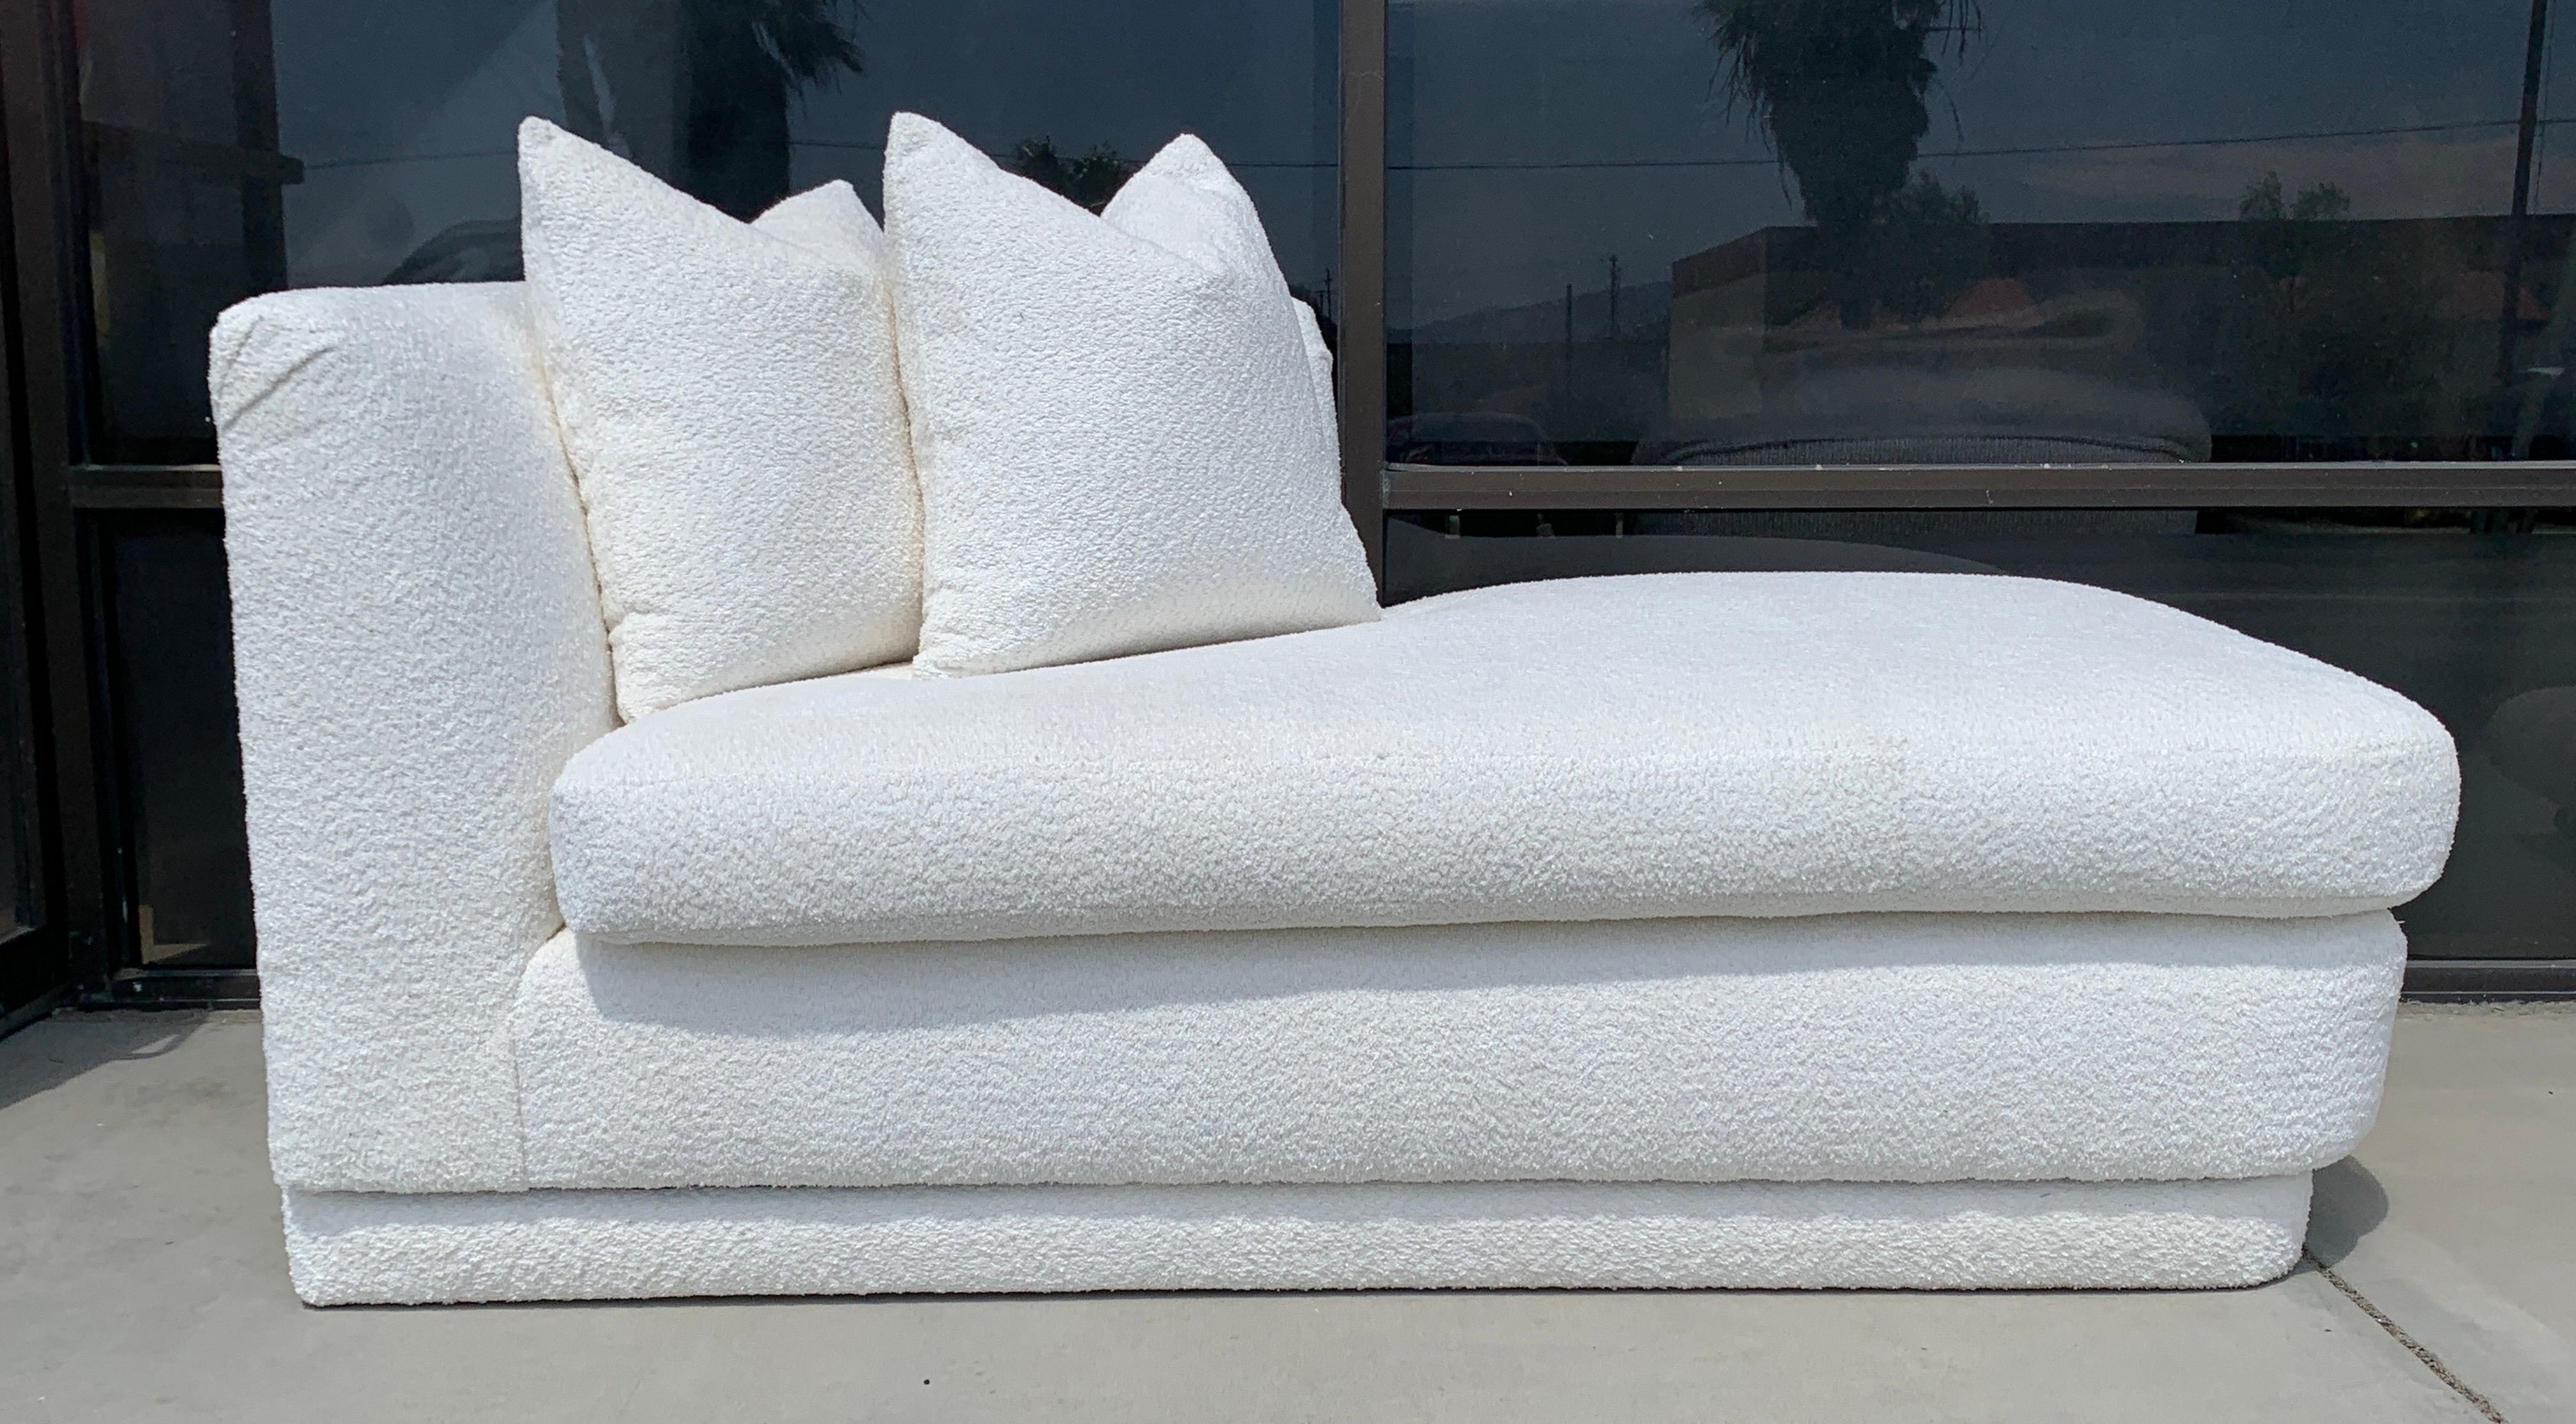 This beautiful chaise lounge came from a designer, perfect Vintage Home in Tamarisk Country Club in Rancho Mirage, California, that was designed by the late Steve Chase. Although the original chase was in good condition, we wanted to modernize it